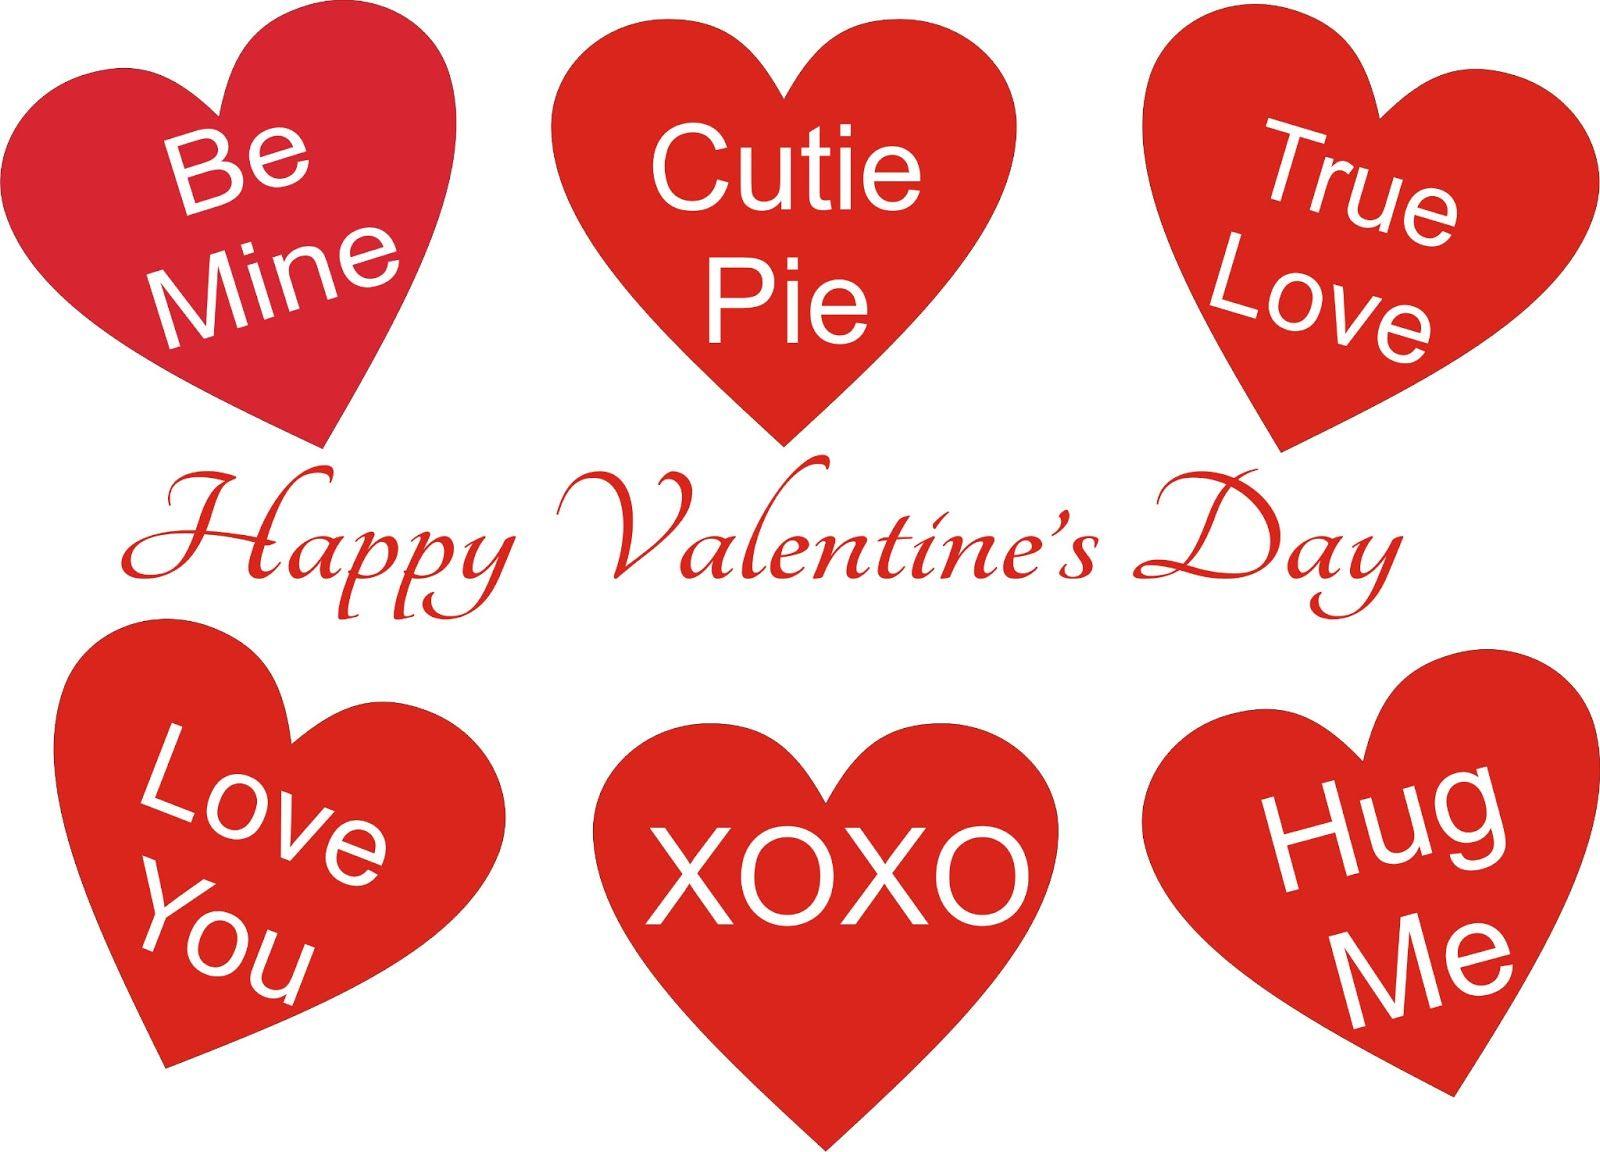 Valentines day Image Download For Whatsapp Facebook Husband. Happy